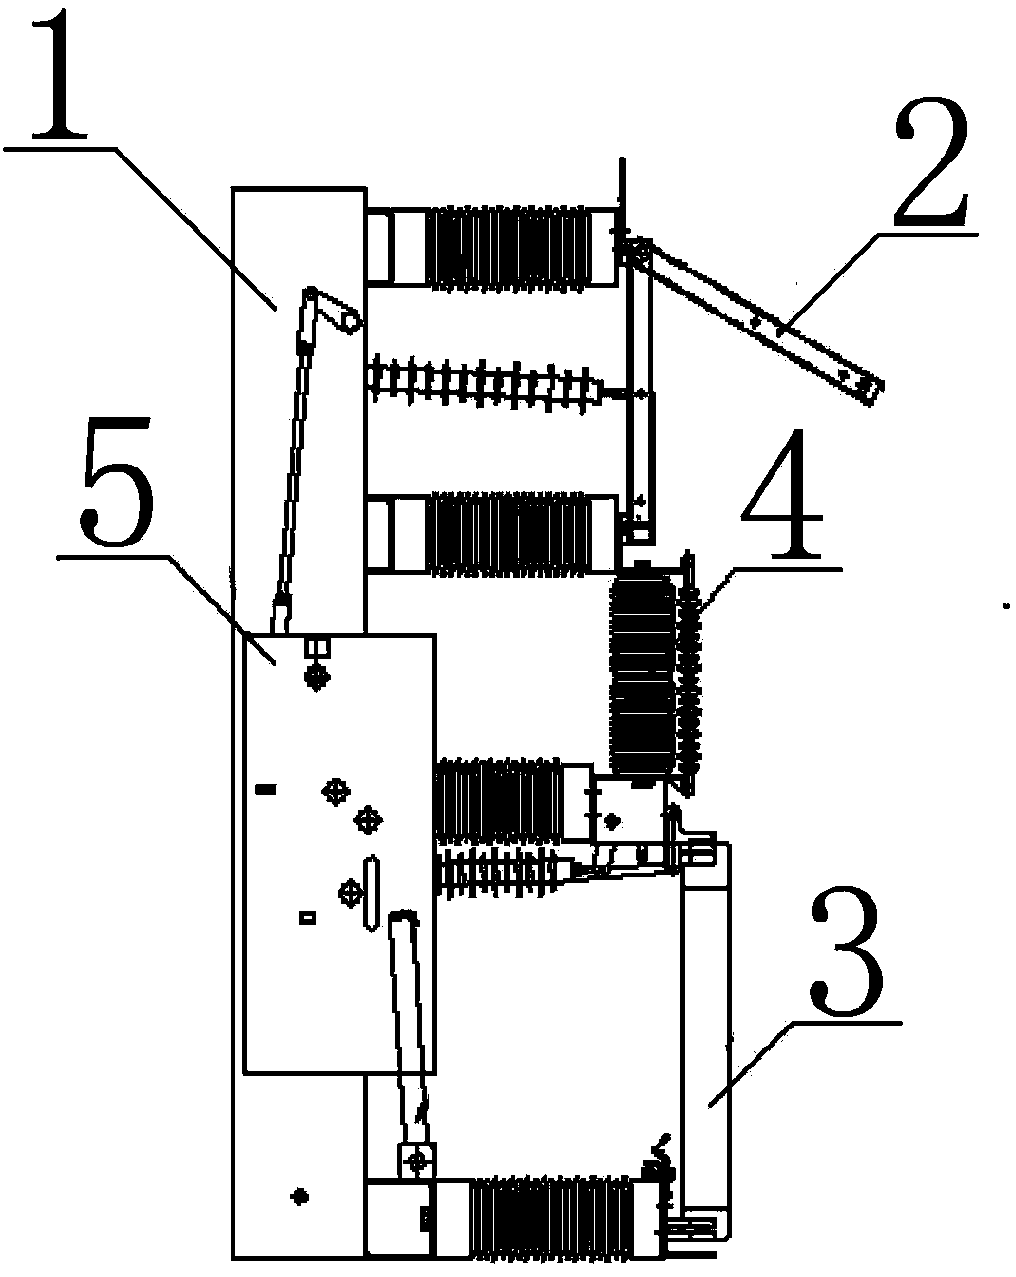 Indoor high-voltage vacuum load switch-fuse combined electrical apparatus